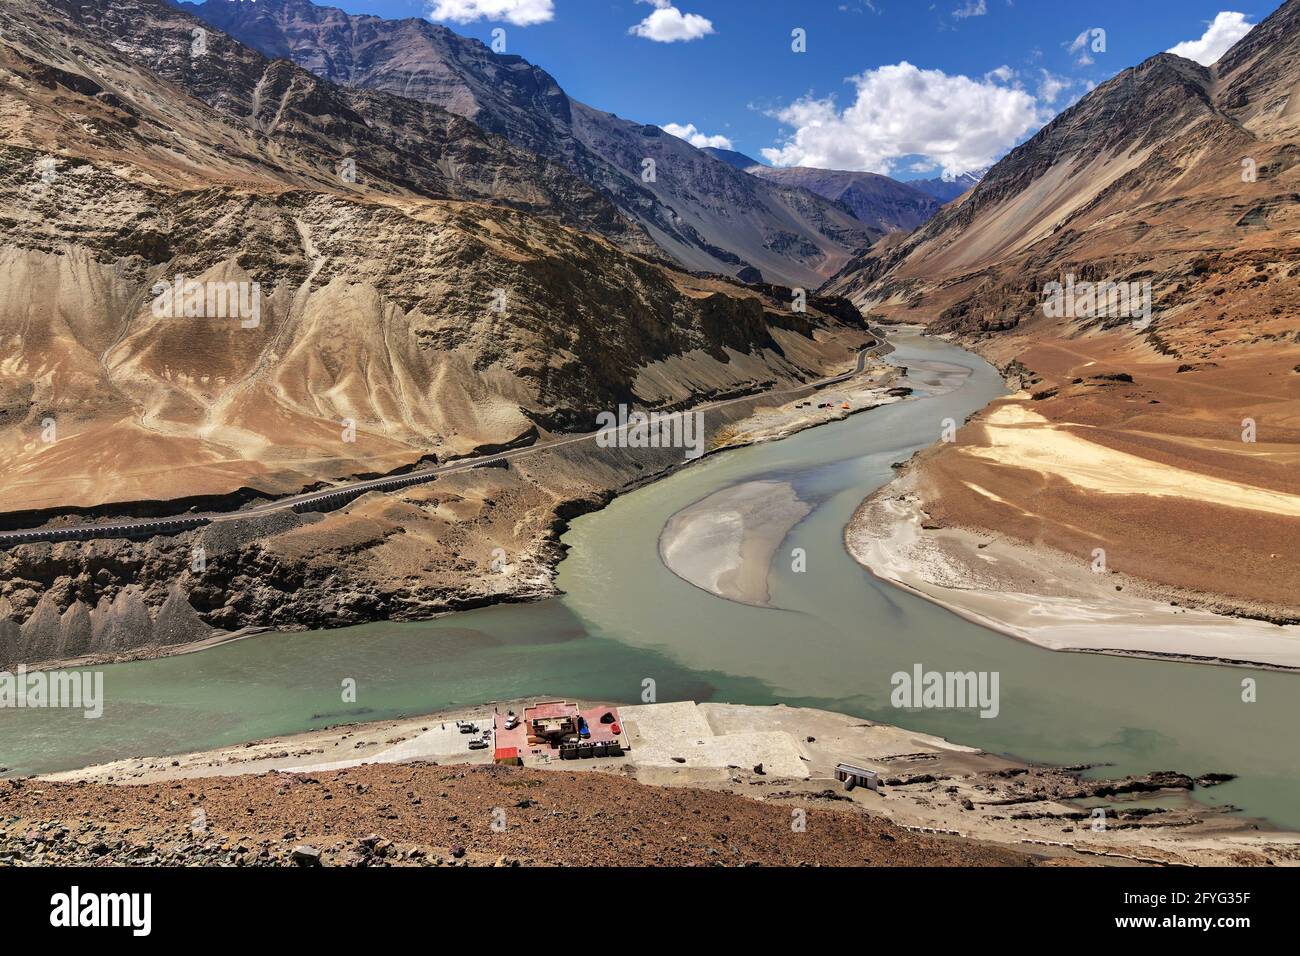 Scenic view of Confluence of Zanskar river from left and Indus rivers from up right - Leh, Ladakh, Jammu and Kashmir, India. Famous tourist spot. Stock Photo